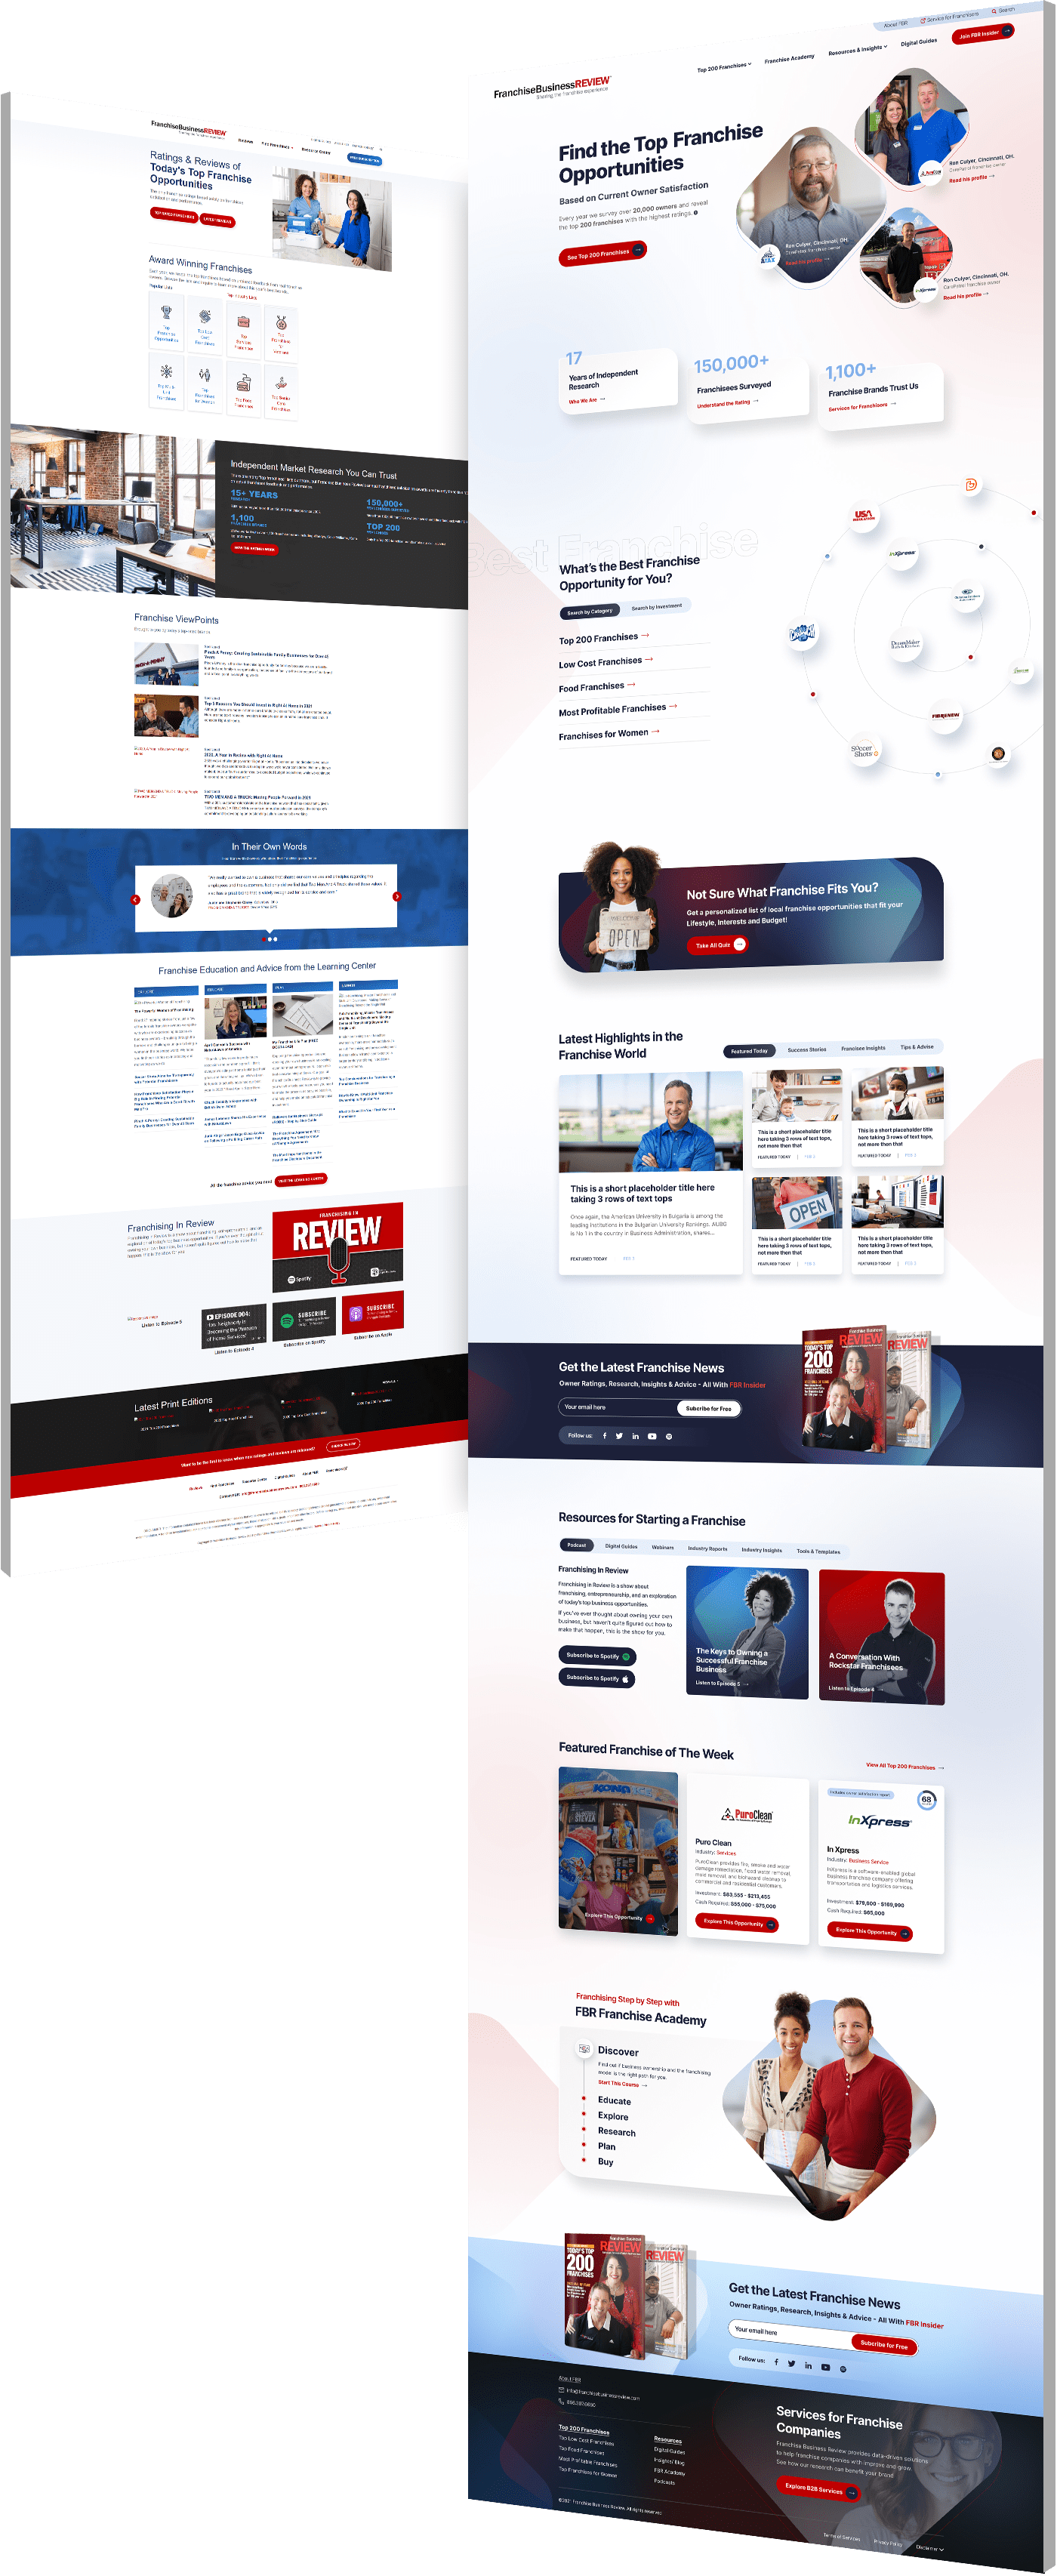 Web design before and after photos of Franchise Business Review